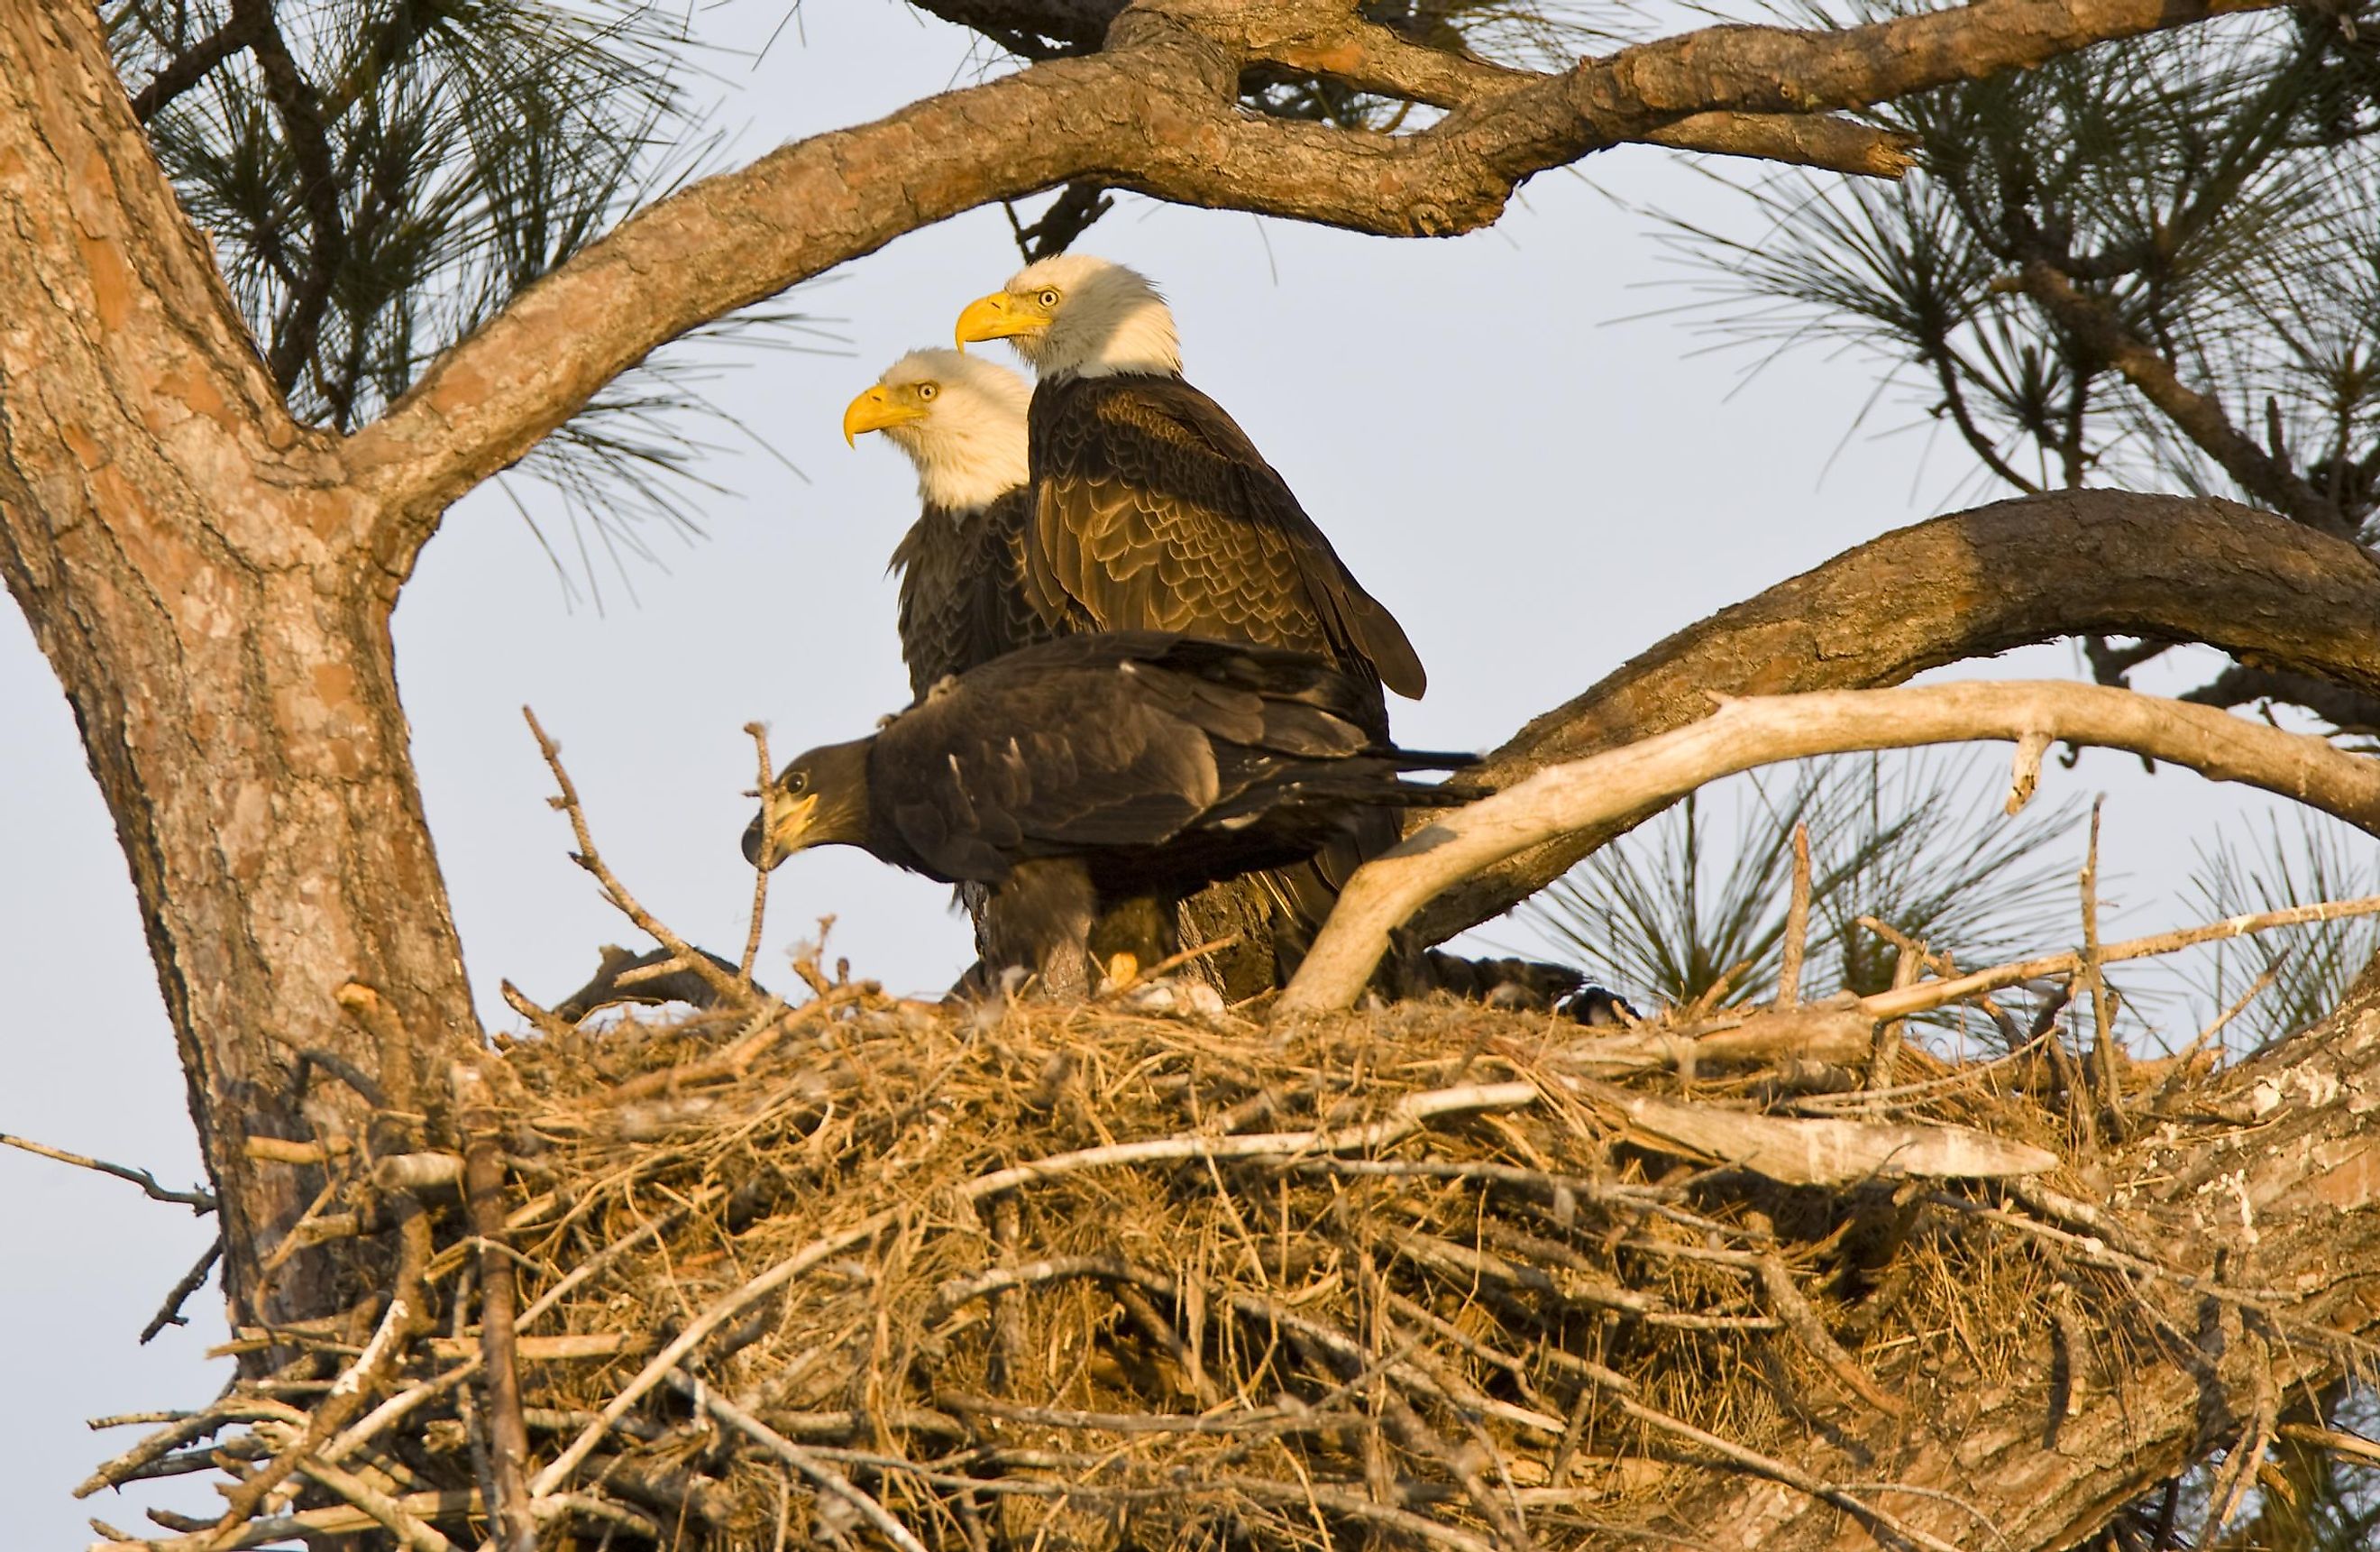 American Bald Eagle family in the nest.